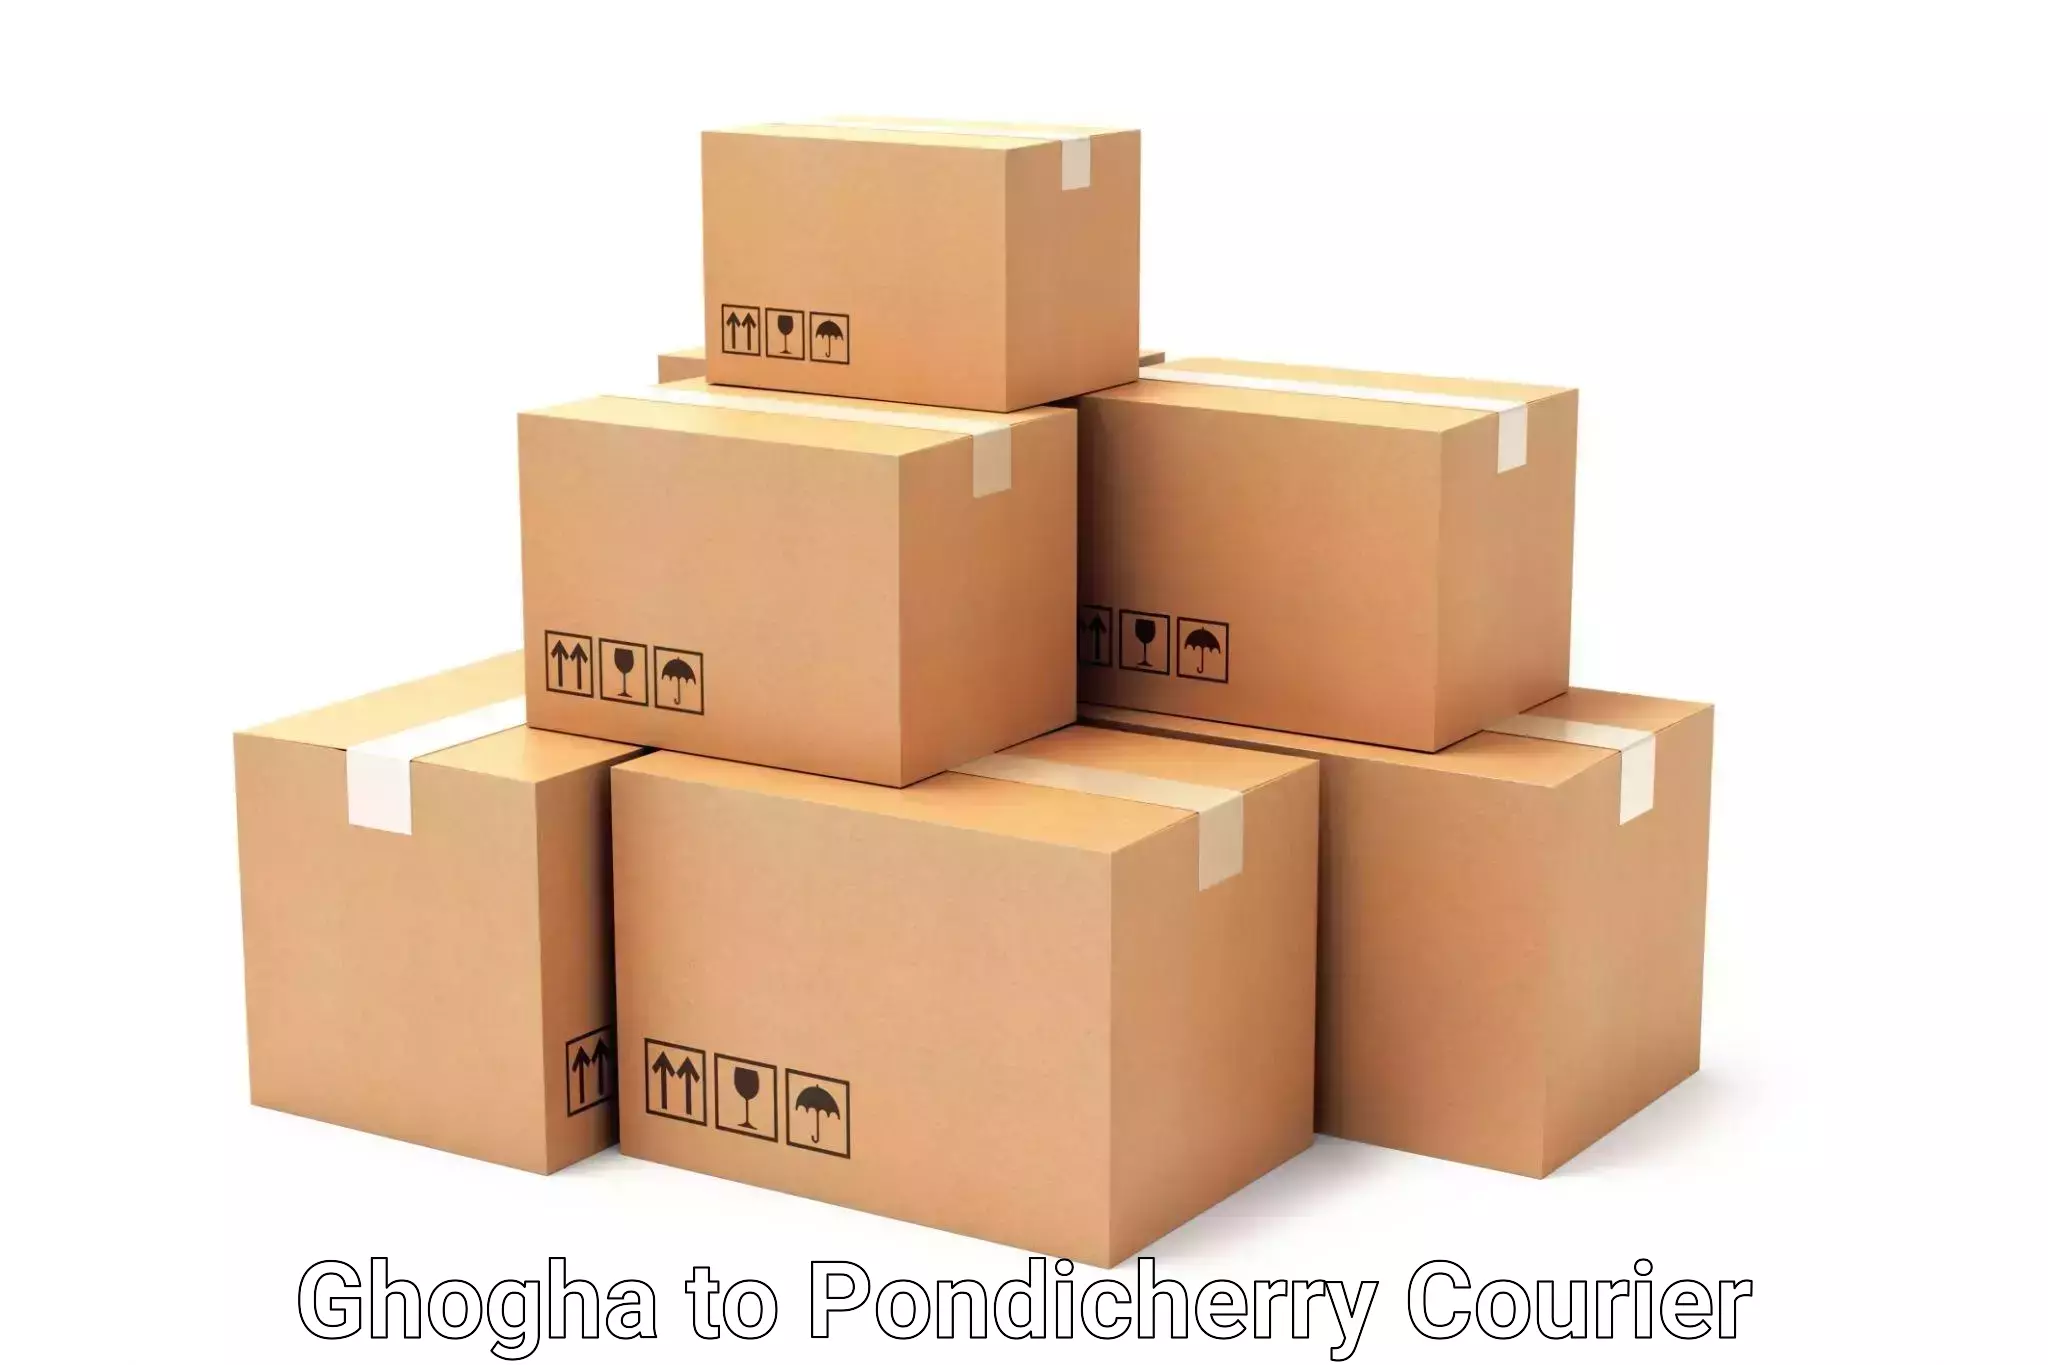 Baggage delivery technology Ghogha to Pondicherry University